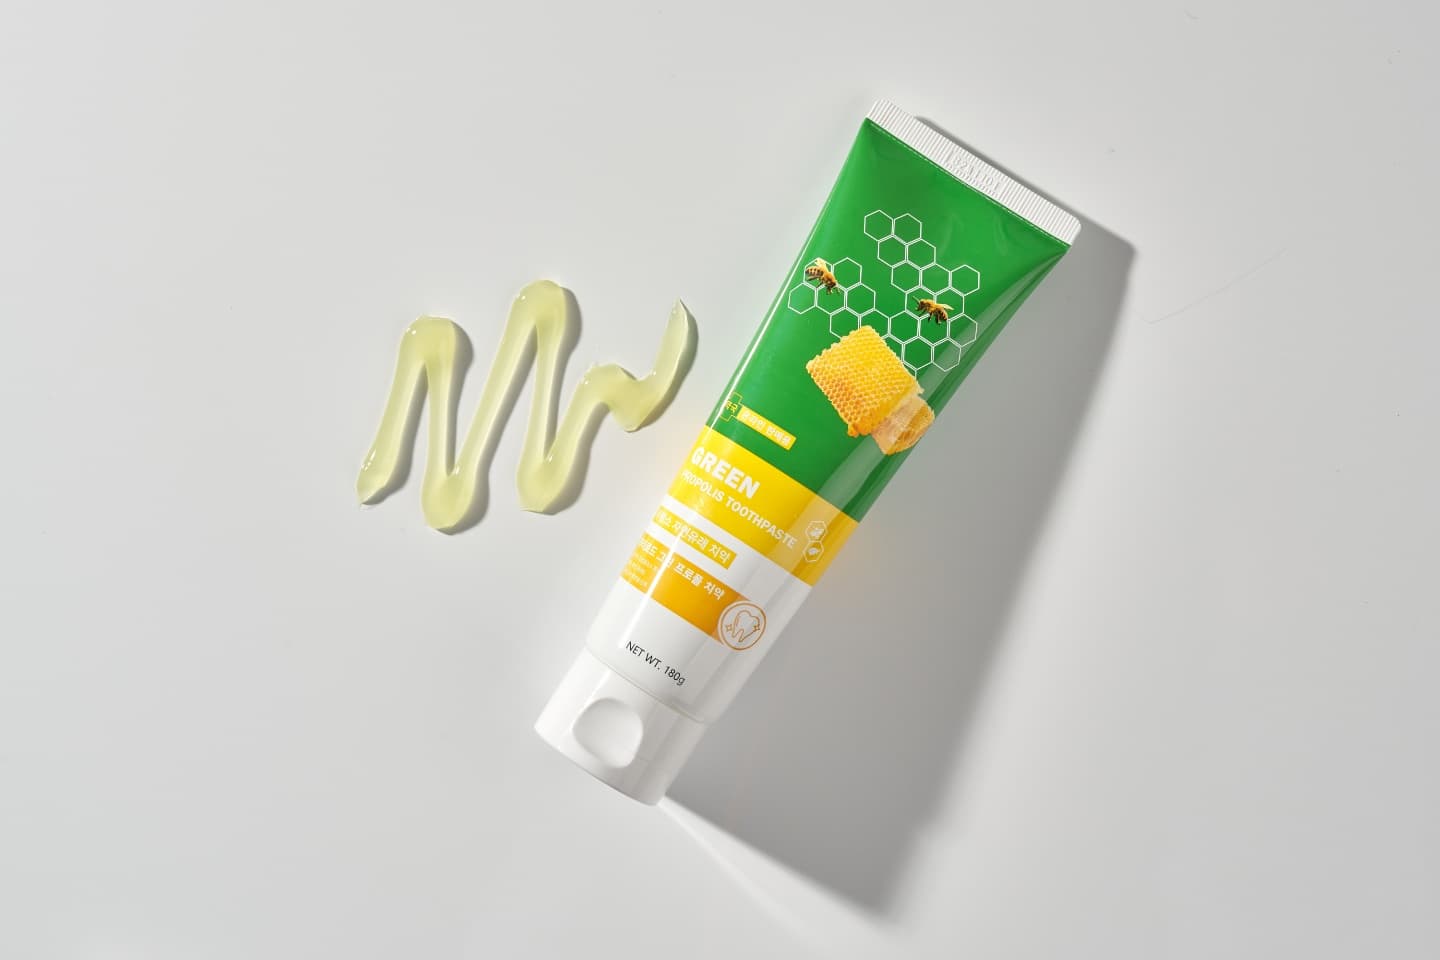 Dr_Lord Green propolis toothpaste